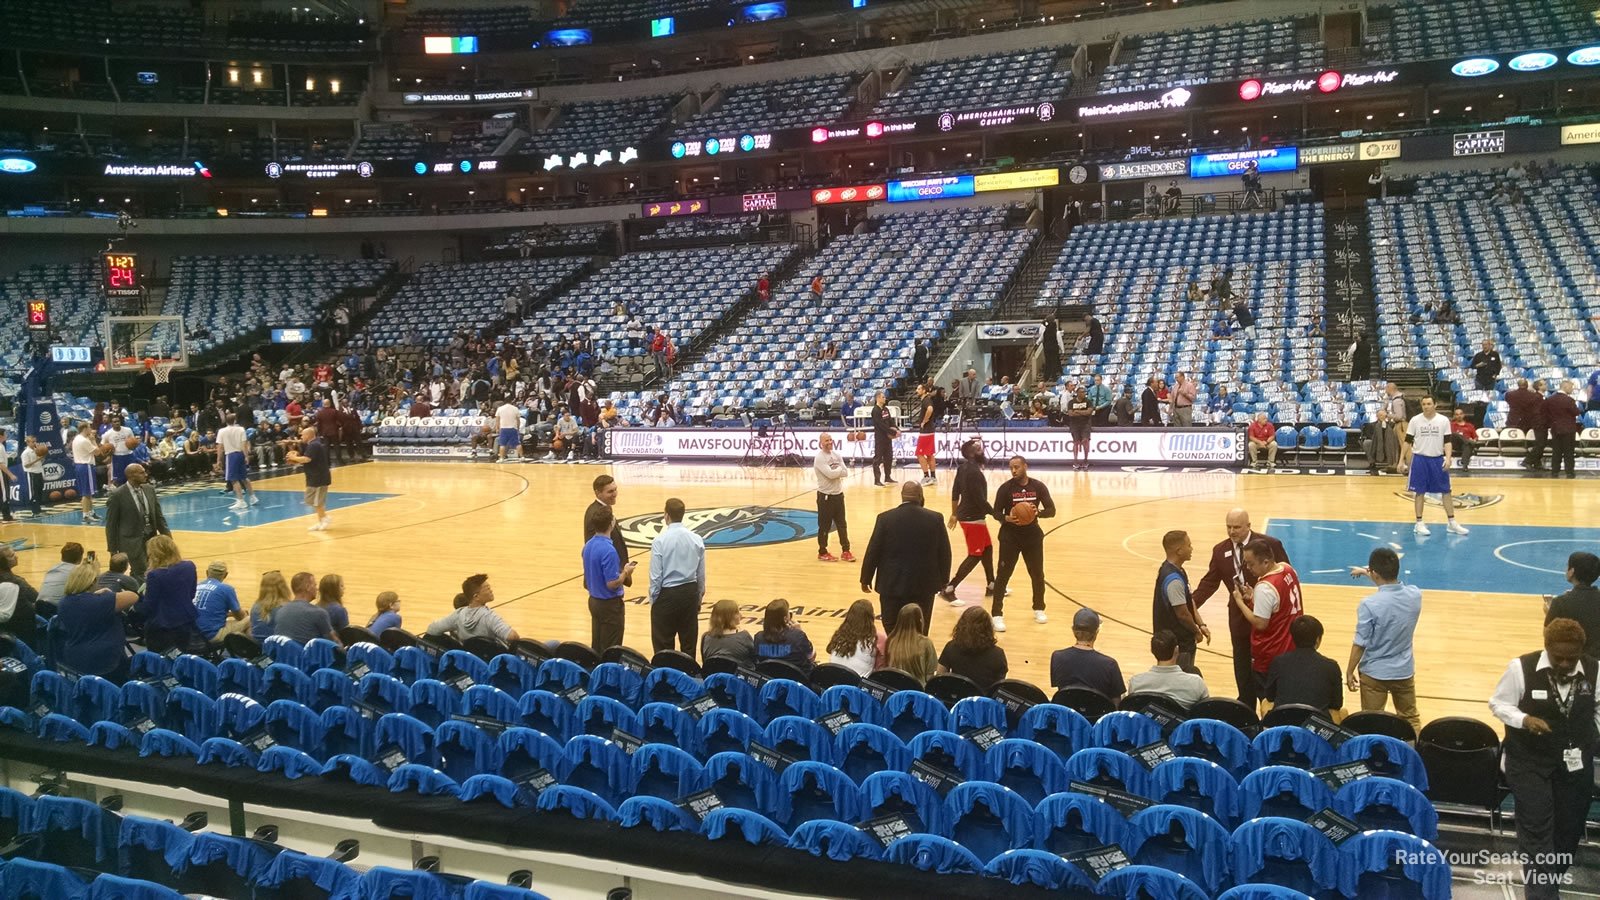 section 106, row f seat view  for basketball - american airlines center